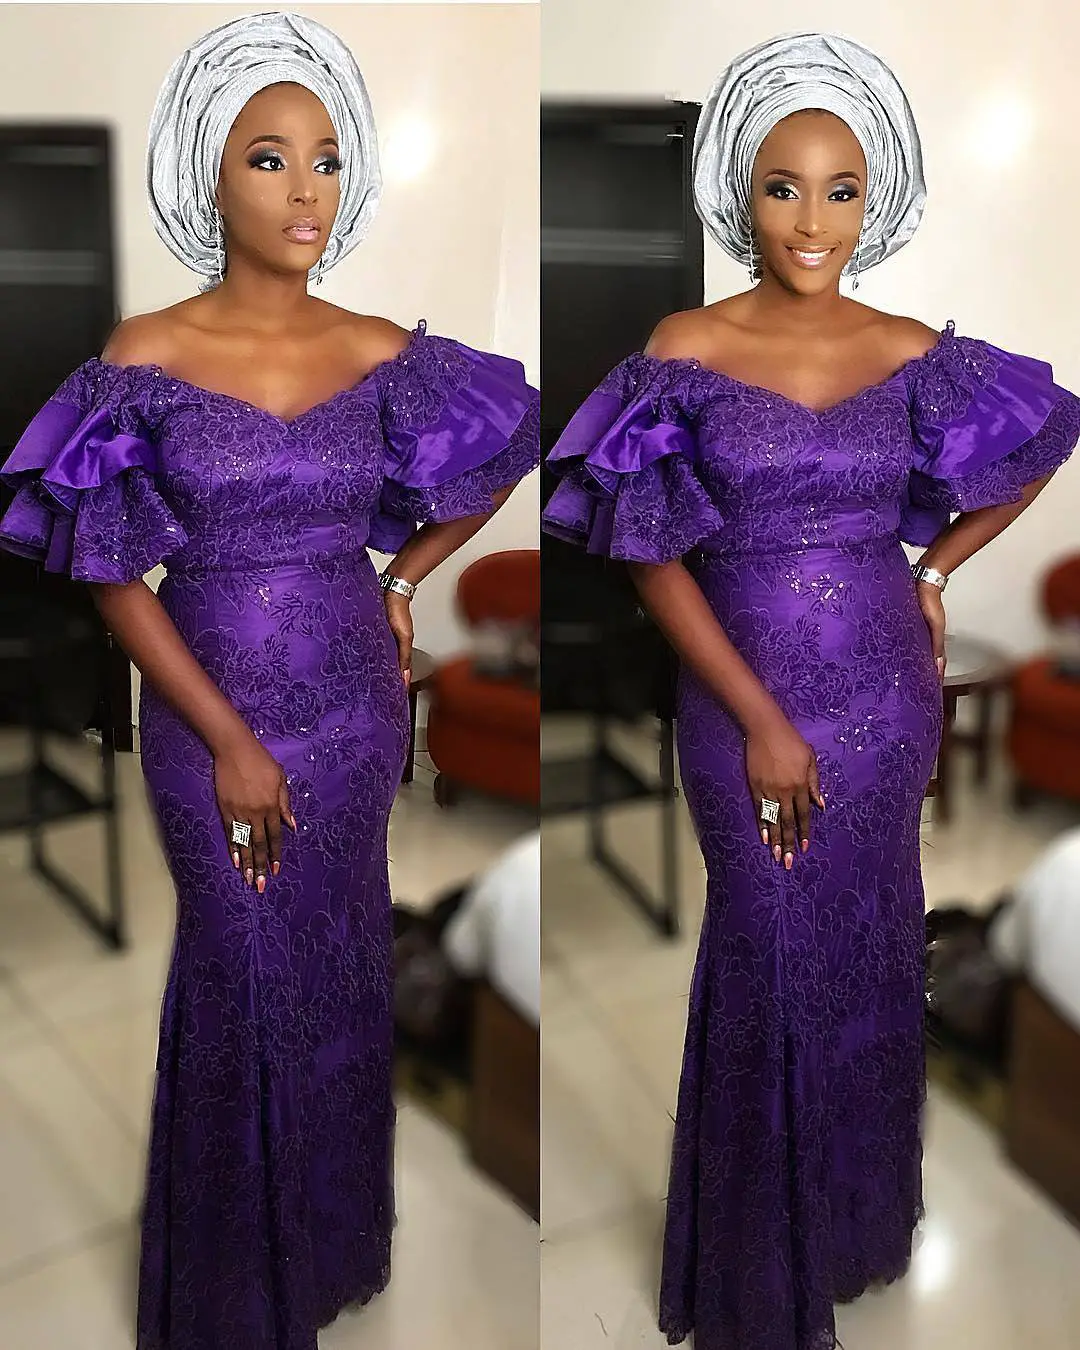  Guess What We've Got For You Here?! Slaying Asoebi Styles